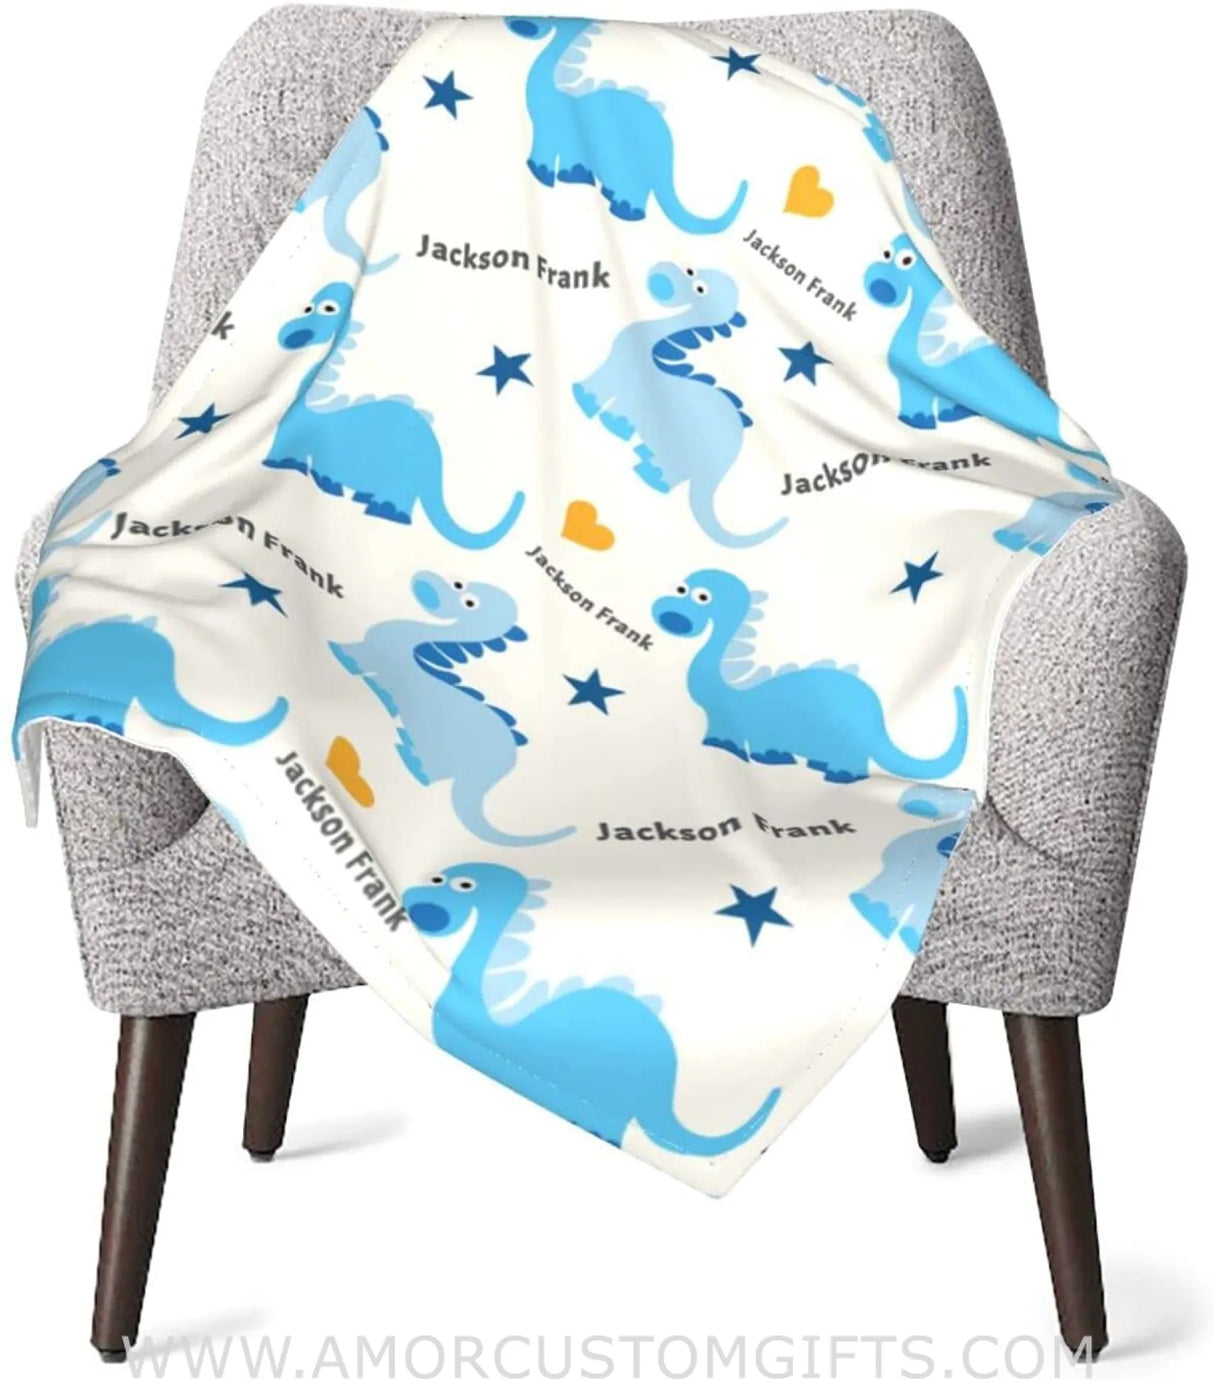 Blankets USA MADE Personalized Baby Blankets for Boys with Name, Dinosaur Baby Boys Blanket with Name for Baby Gifts